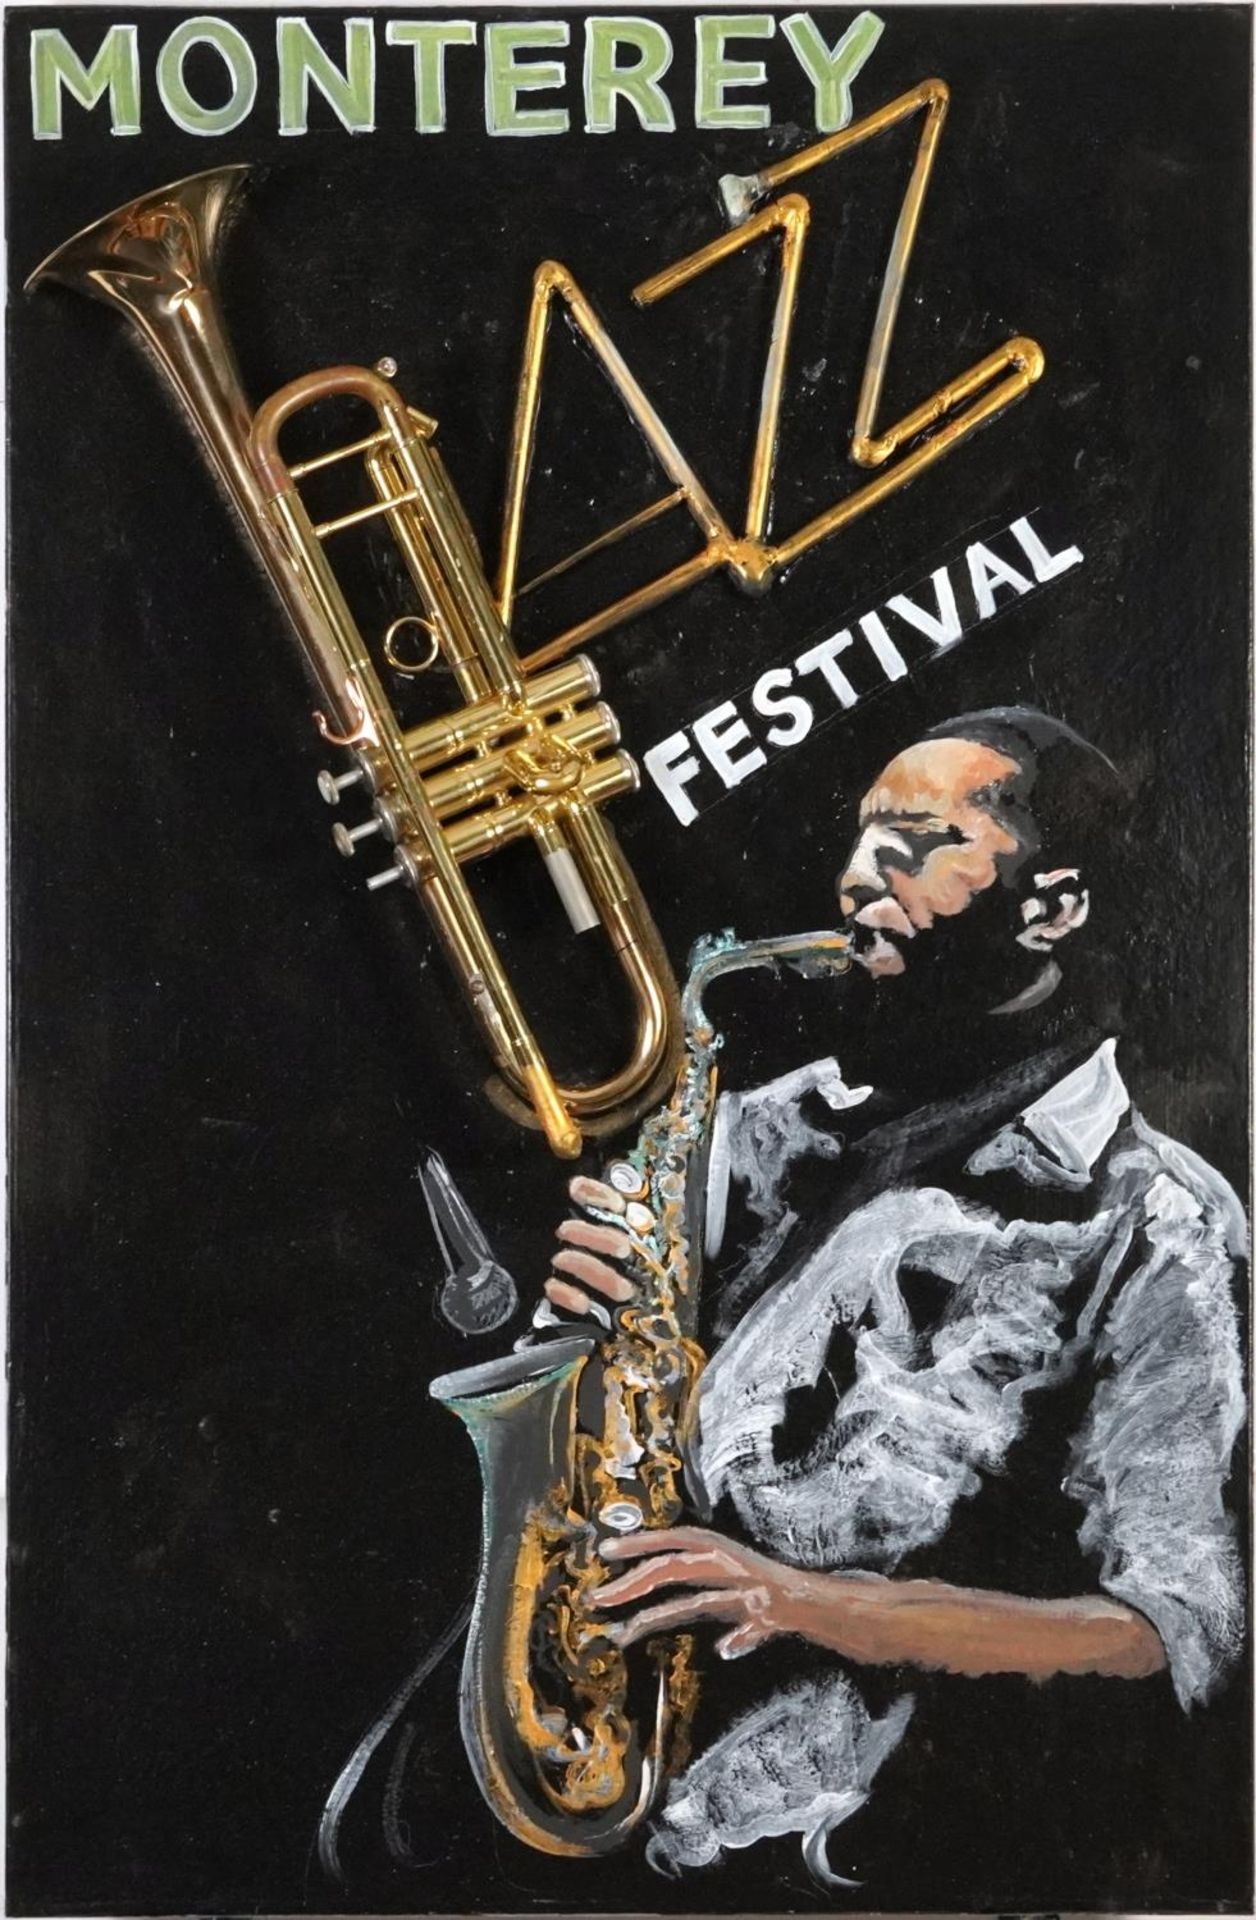 Clive Fredriksson - Monterey Jazz Festival, oil and mixed media on board, unframed, 92cm x 61cm : - Image 2 of 4